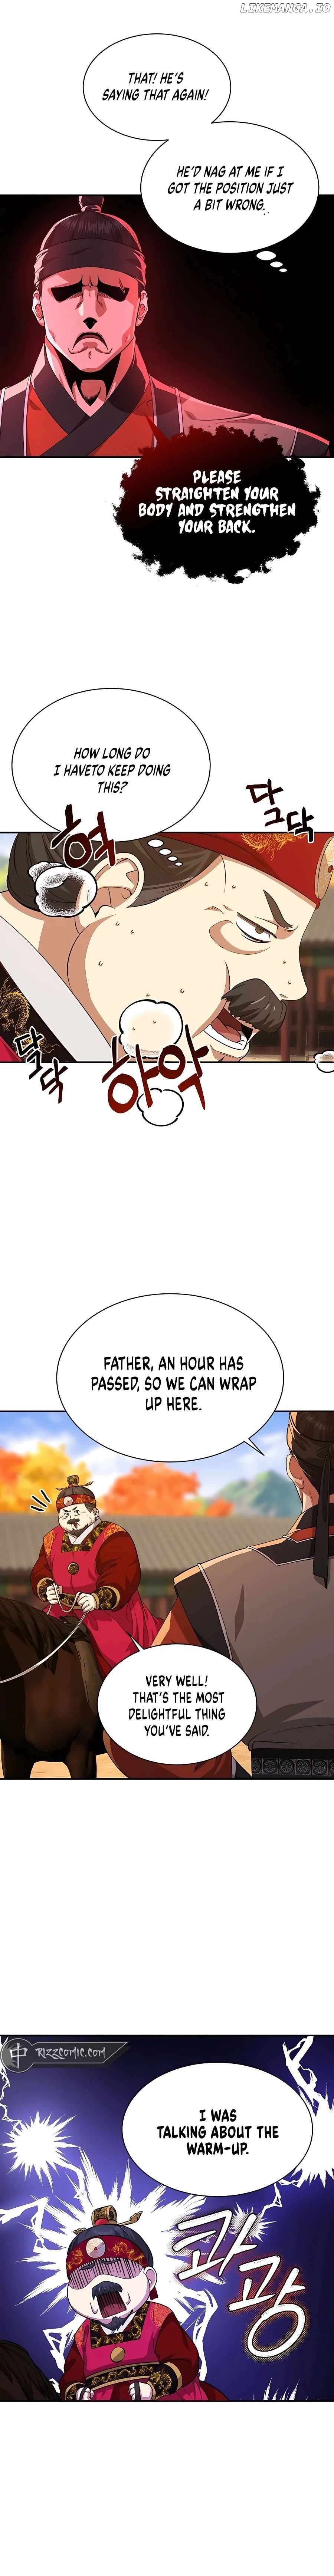 Muscle joseon Chapter 11 - Page 6